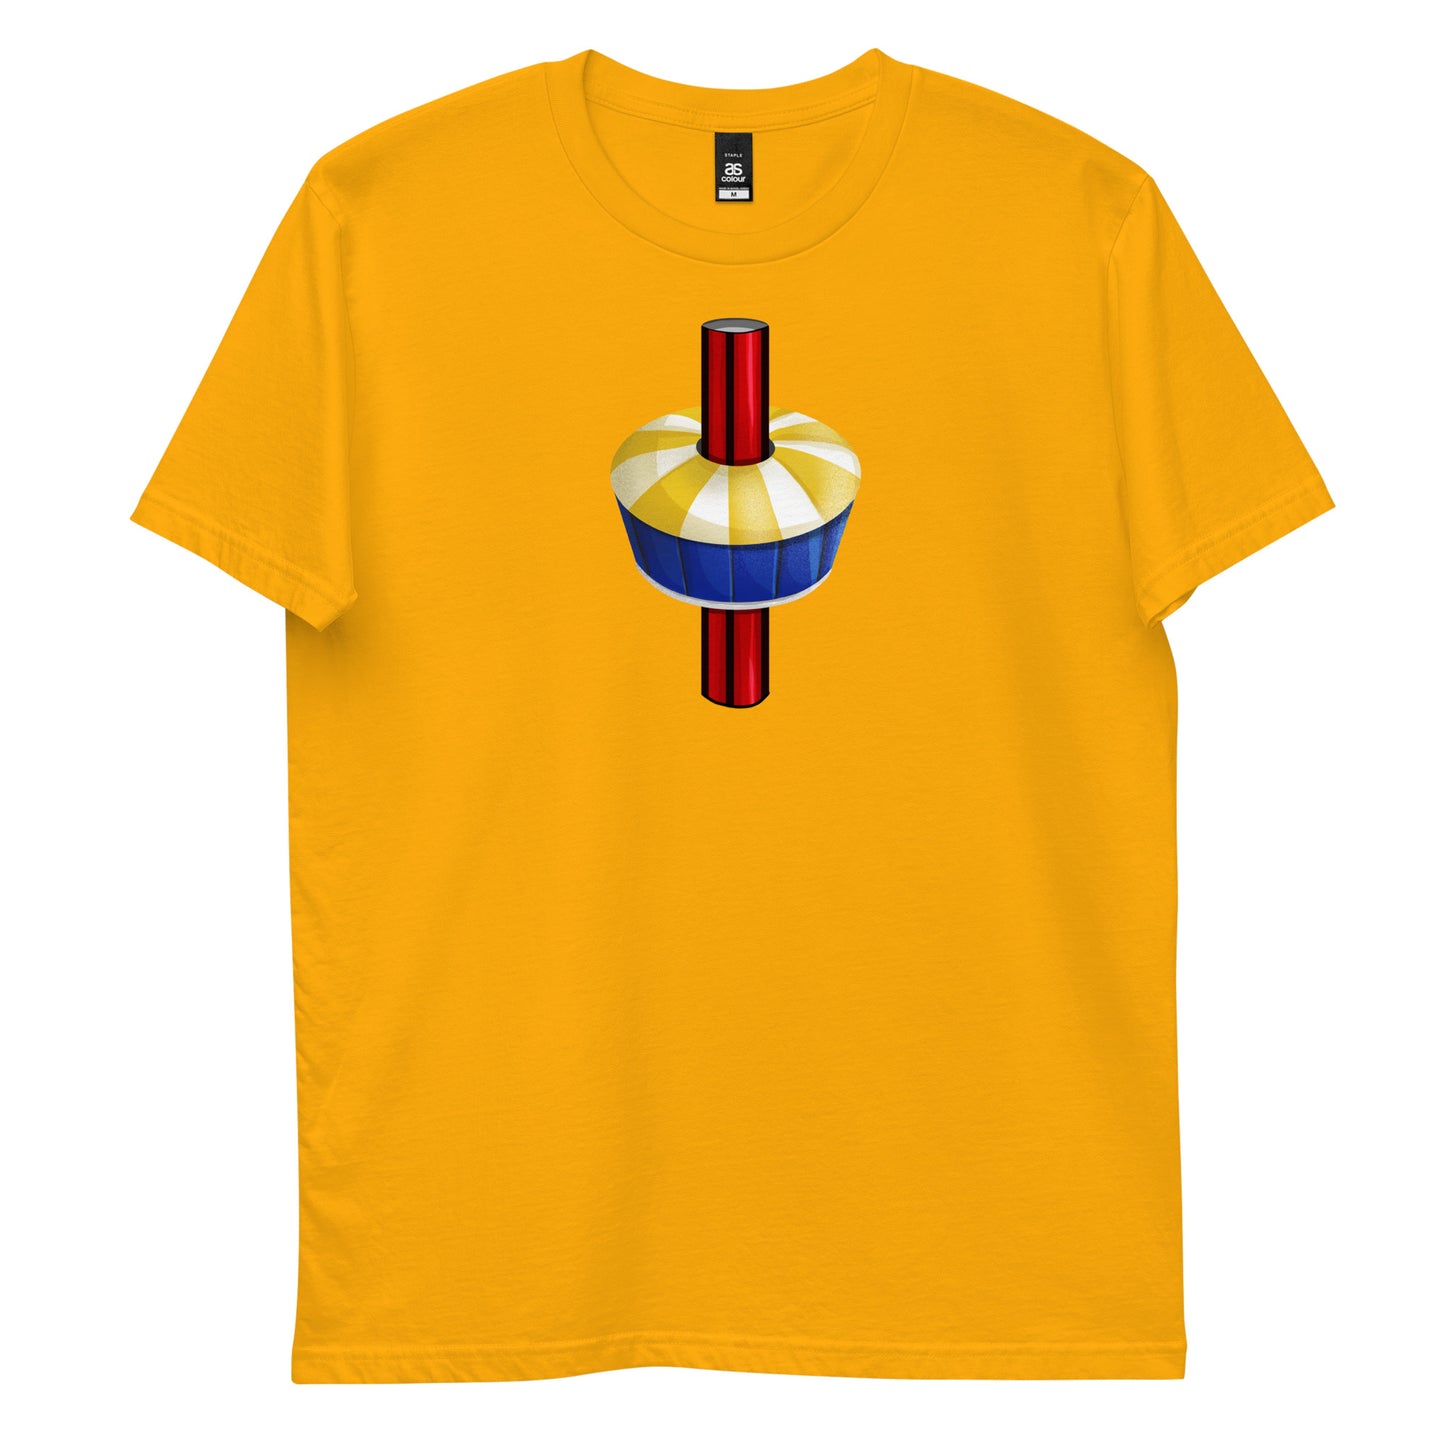 Observation Tower Tee